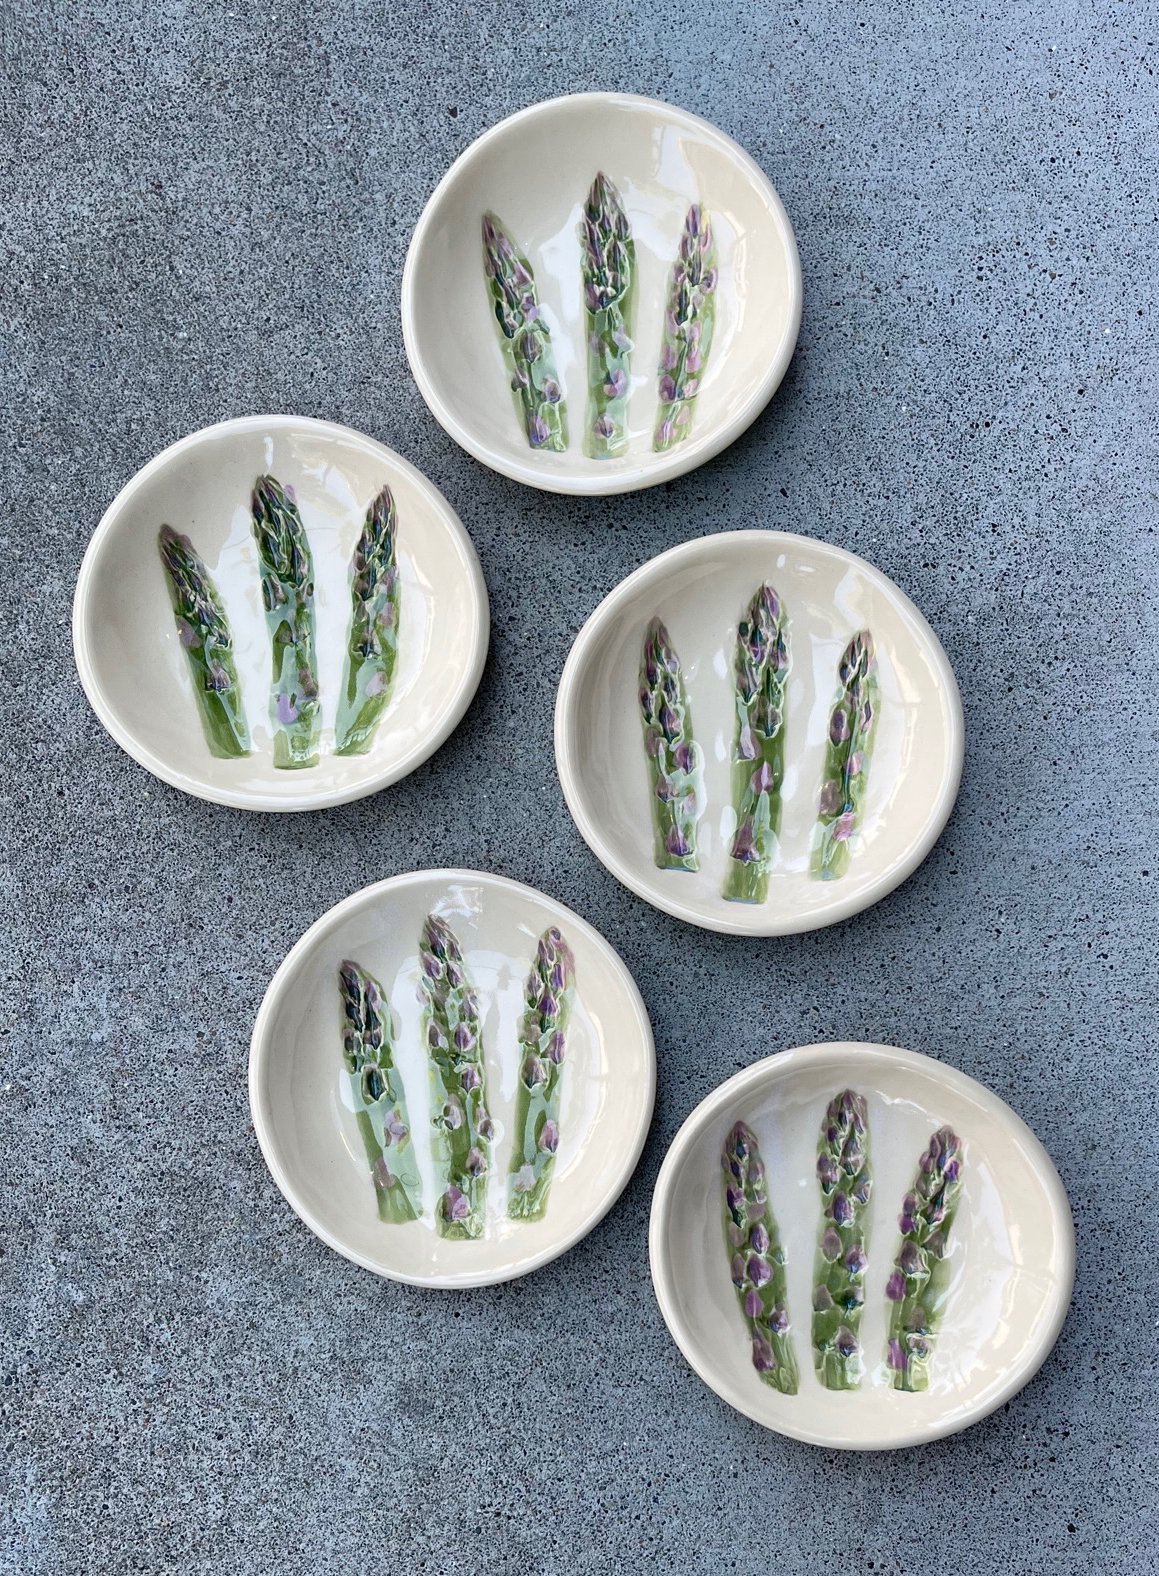 Small Asparagus Dishes by Lorna Newlin